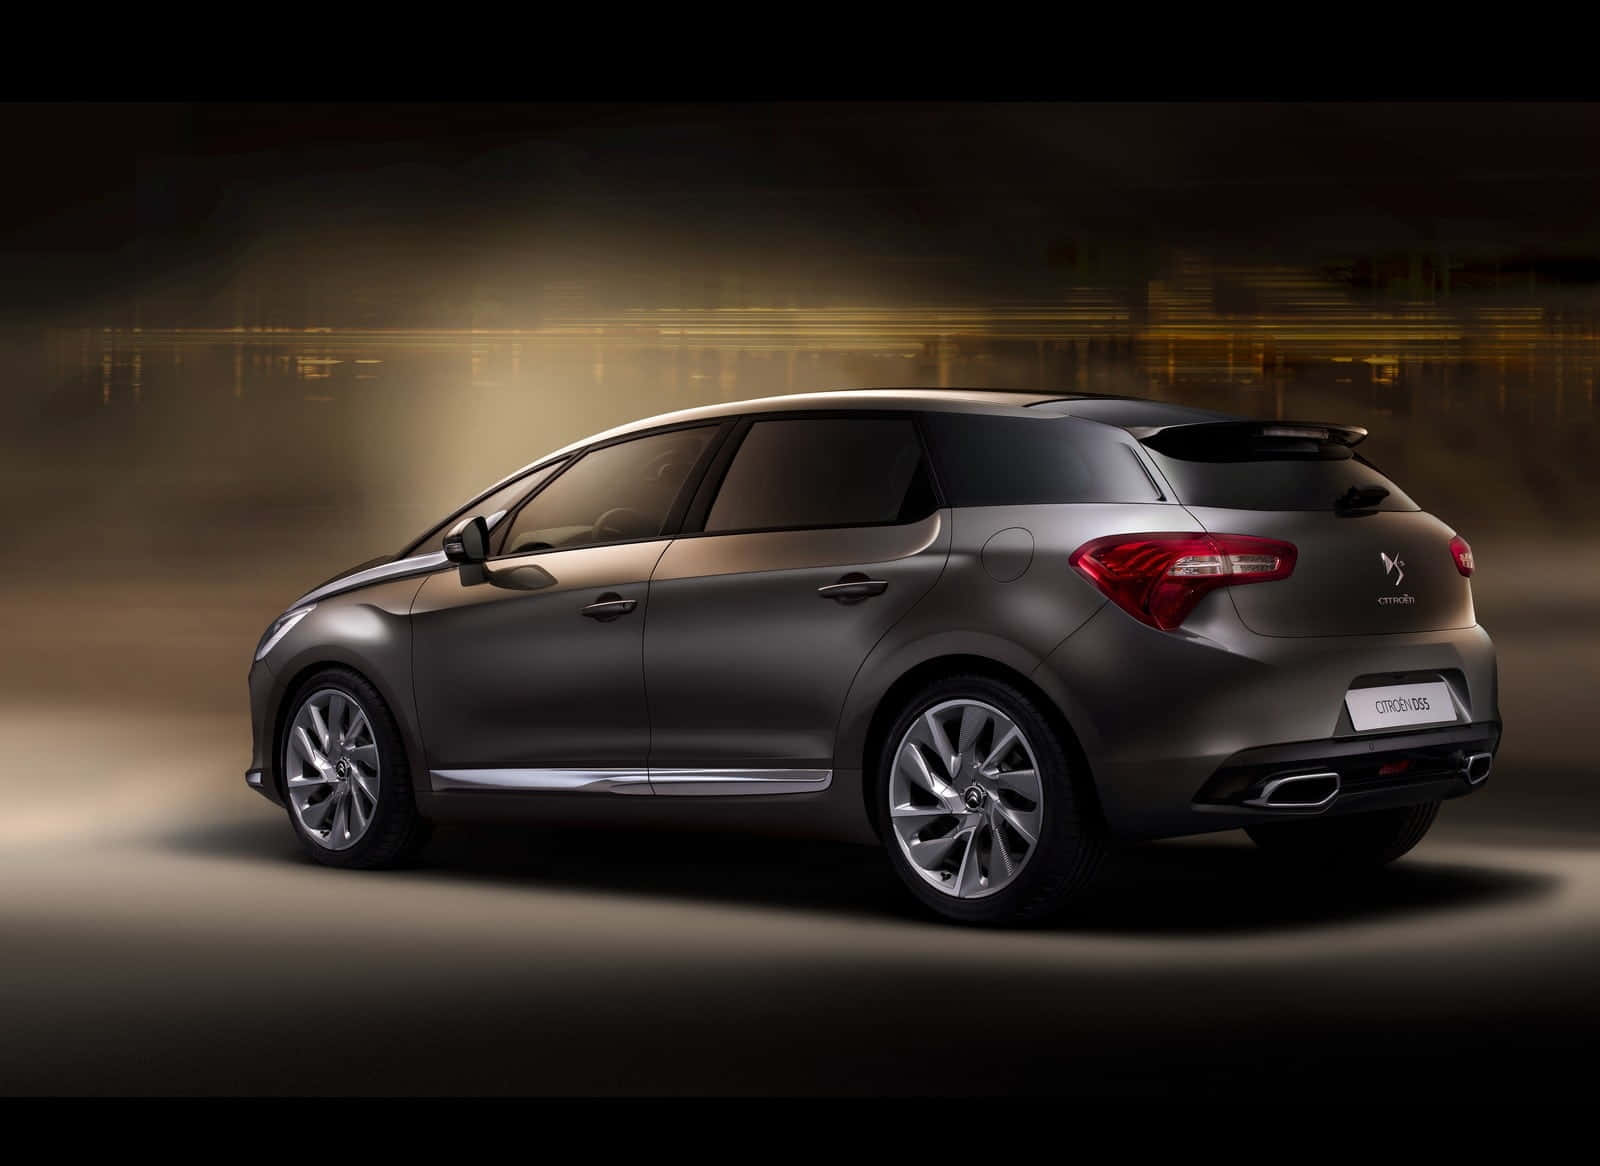 Caption: Sleek And Stylish Citroën Ds5 In A Sunset Backdrop Wallpaper